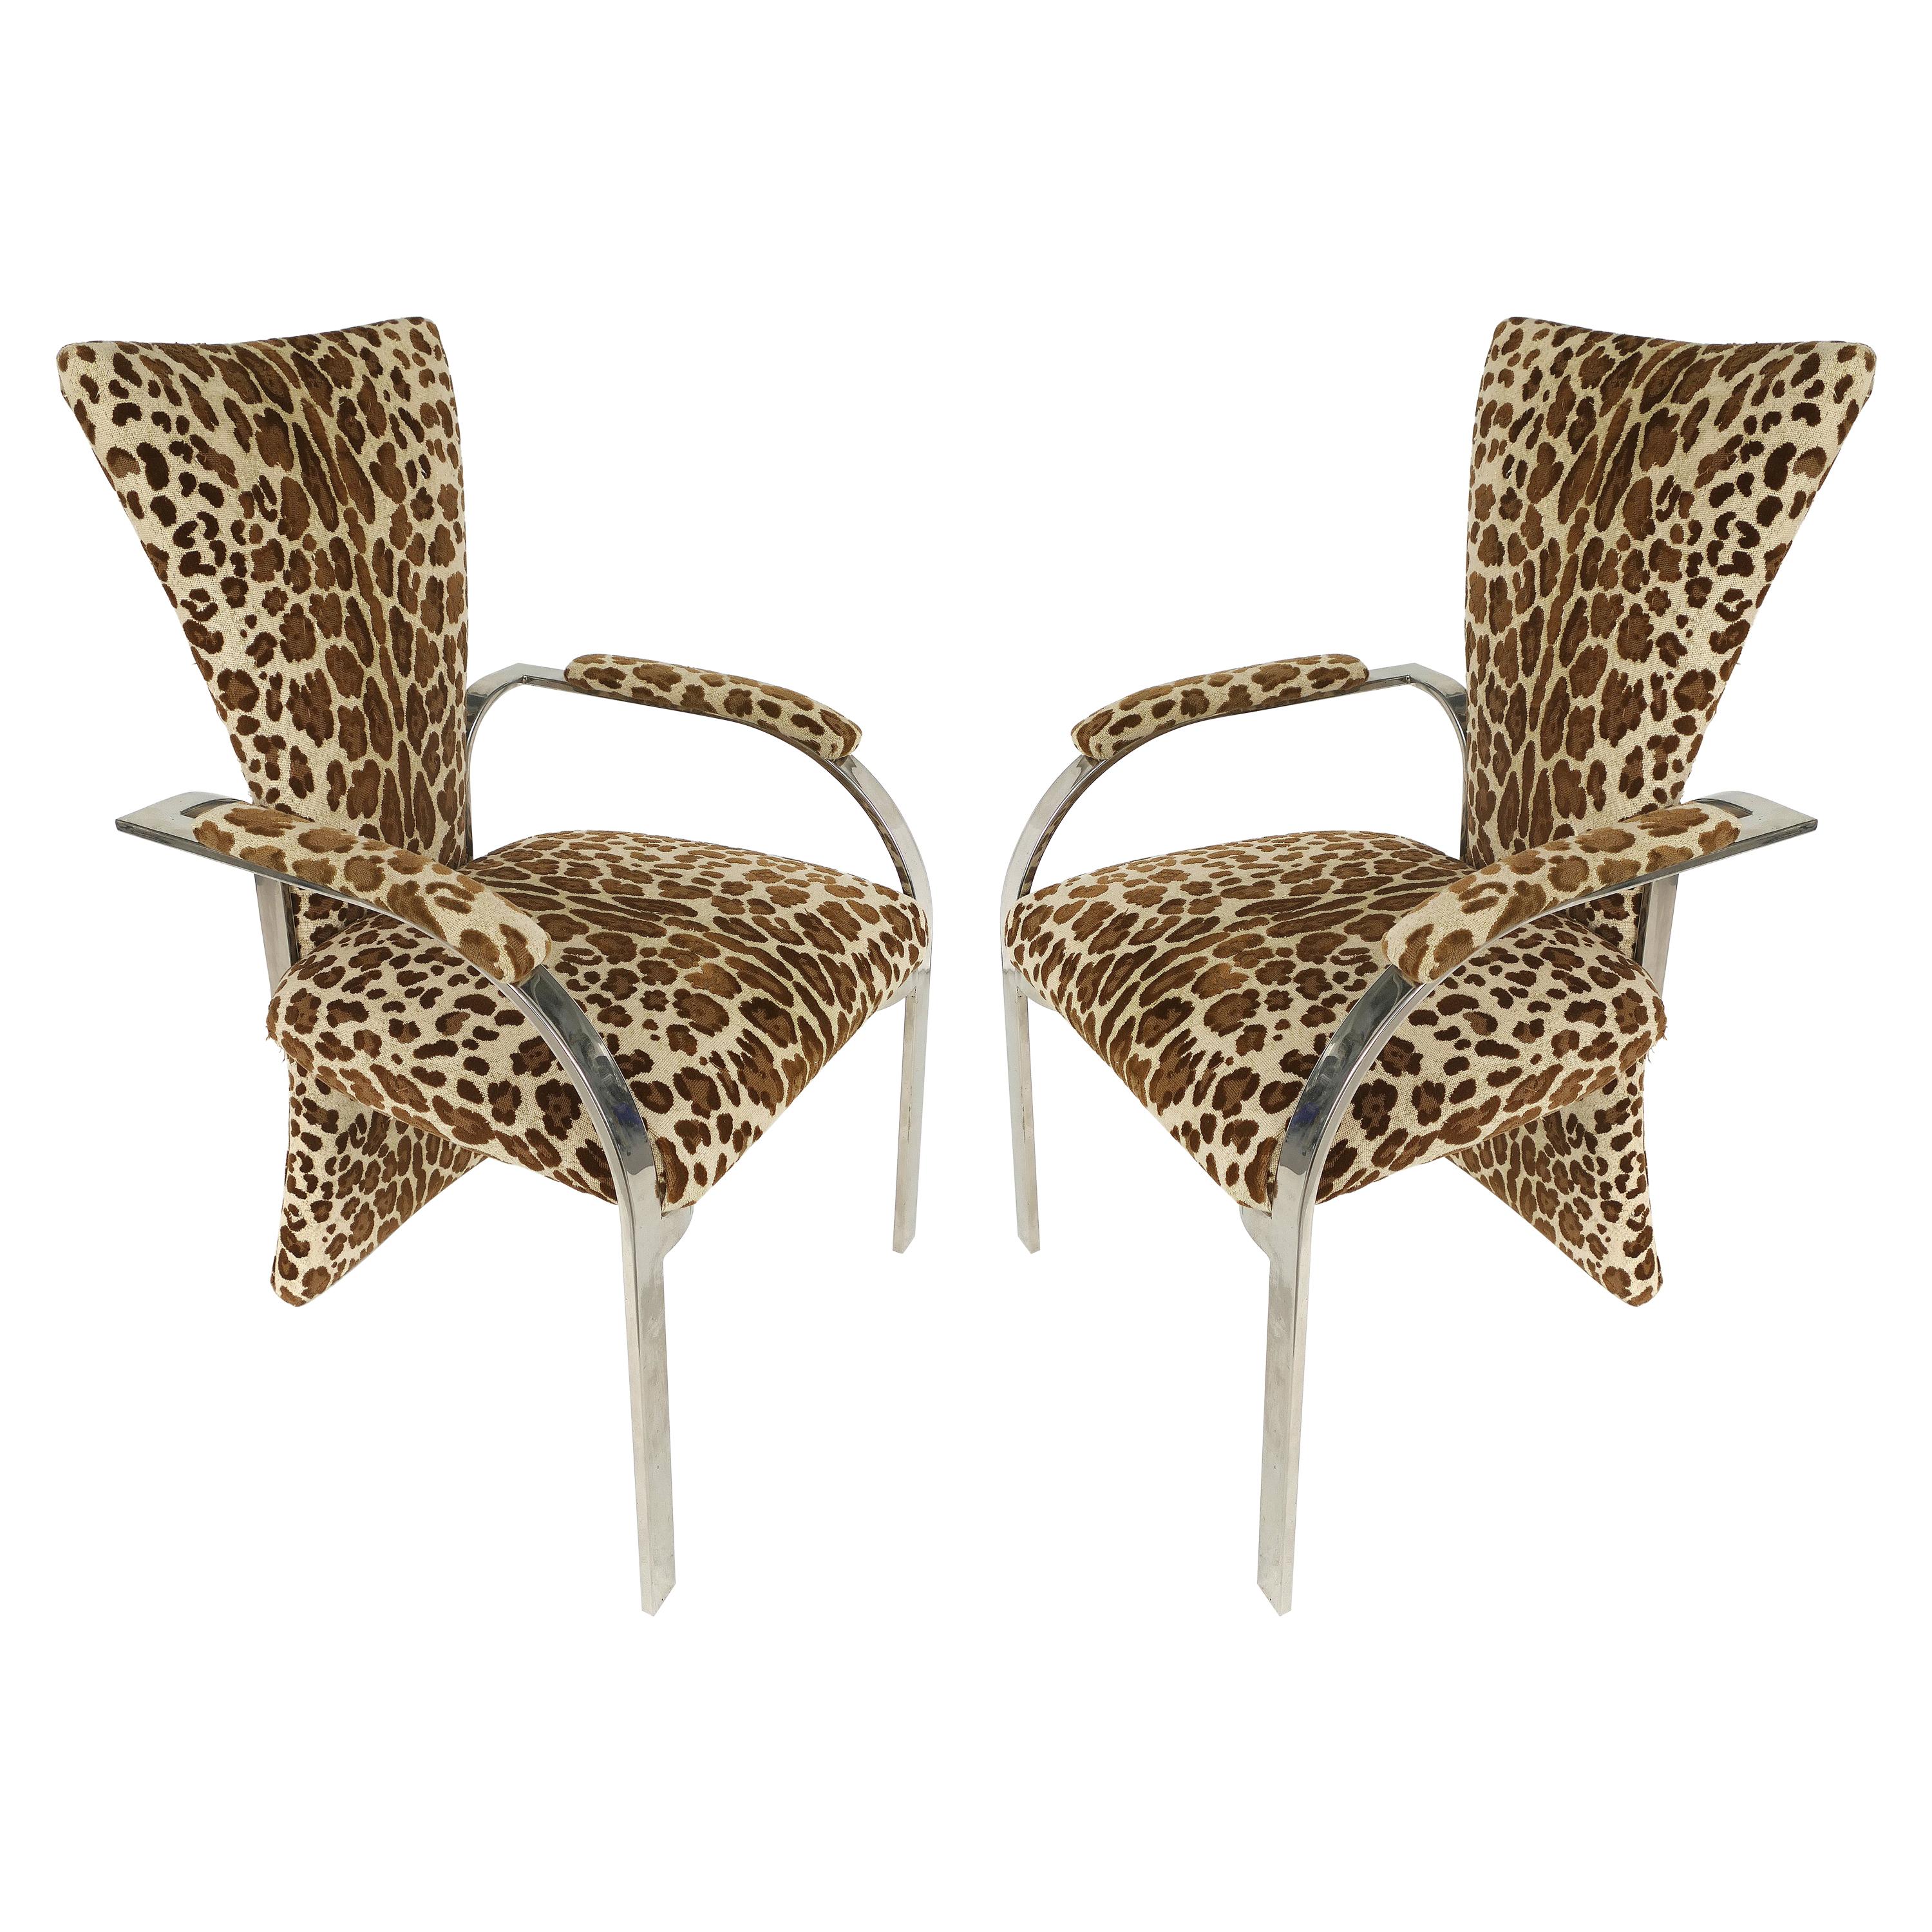 Stainless Steel Armchairs with Leopard Animal Print Upholstery